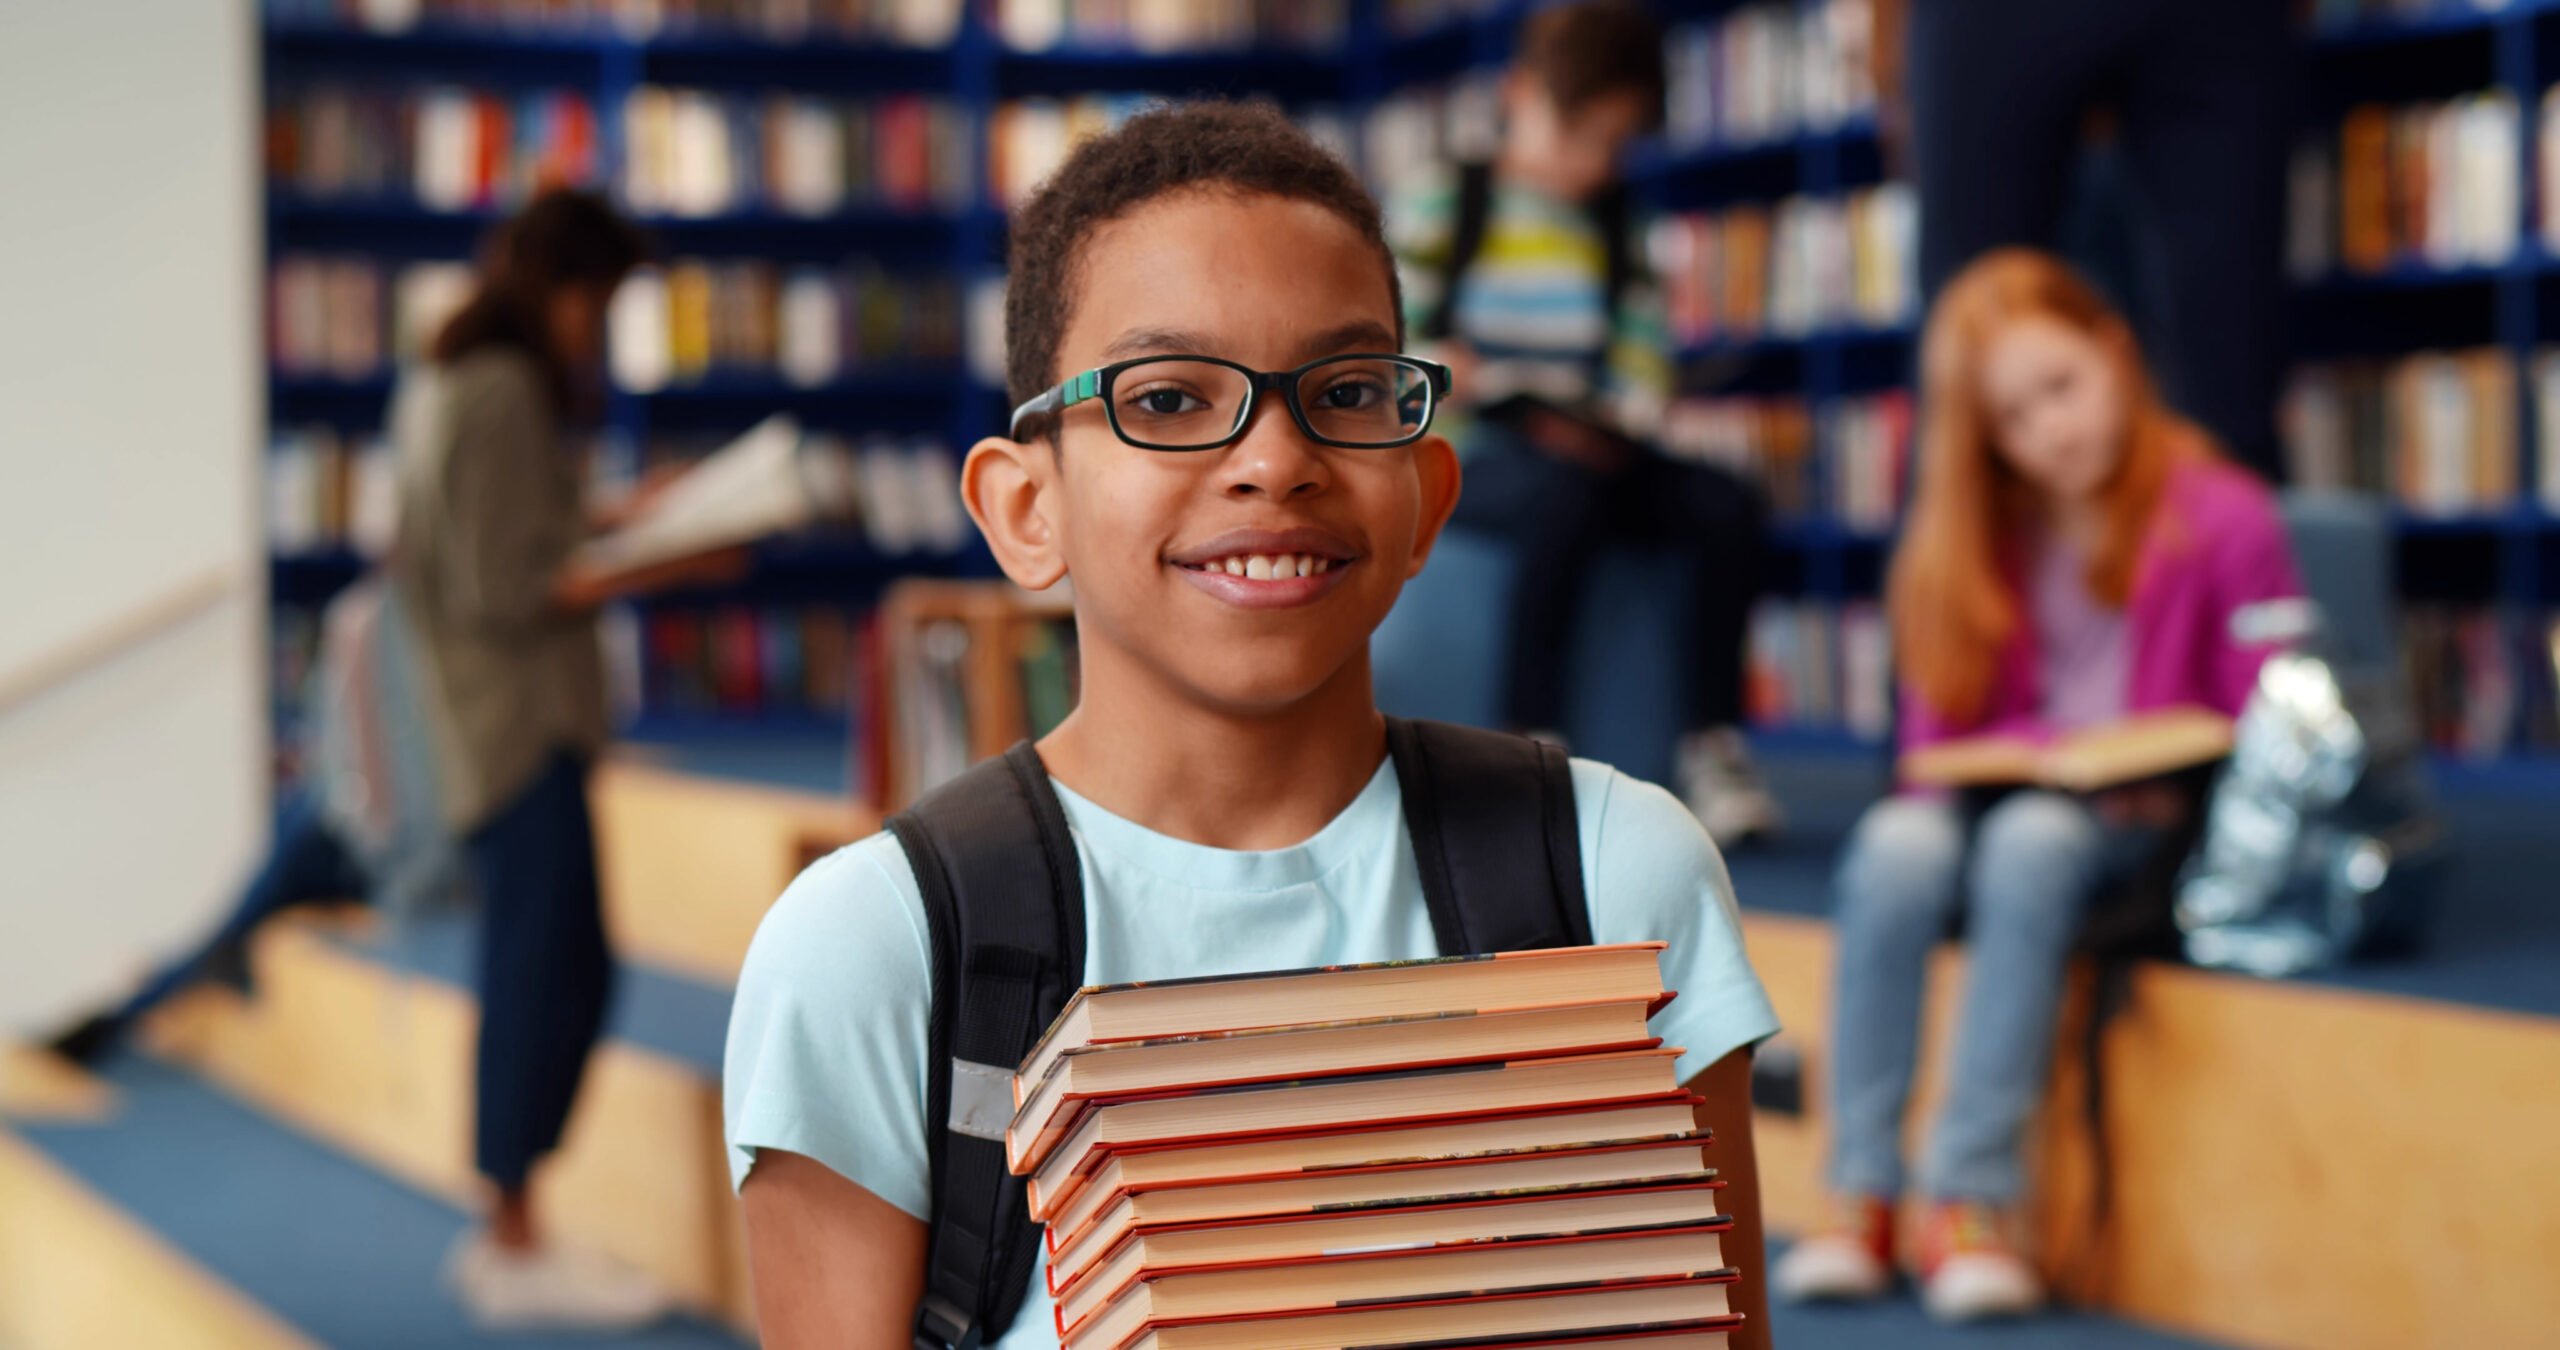 Middle eastern boy holding stack of books against multi colored bookshelf in library. Portrait of happy african schoolboy with textbooks smiling at camera in school library